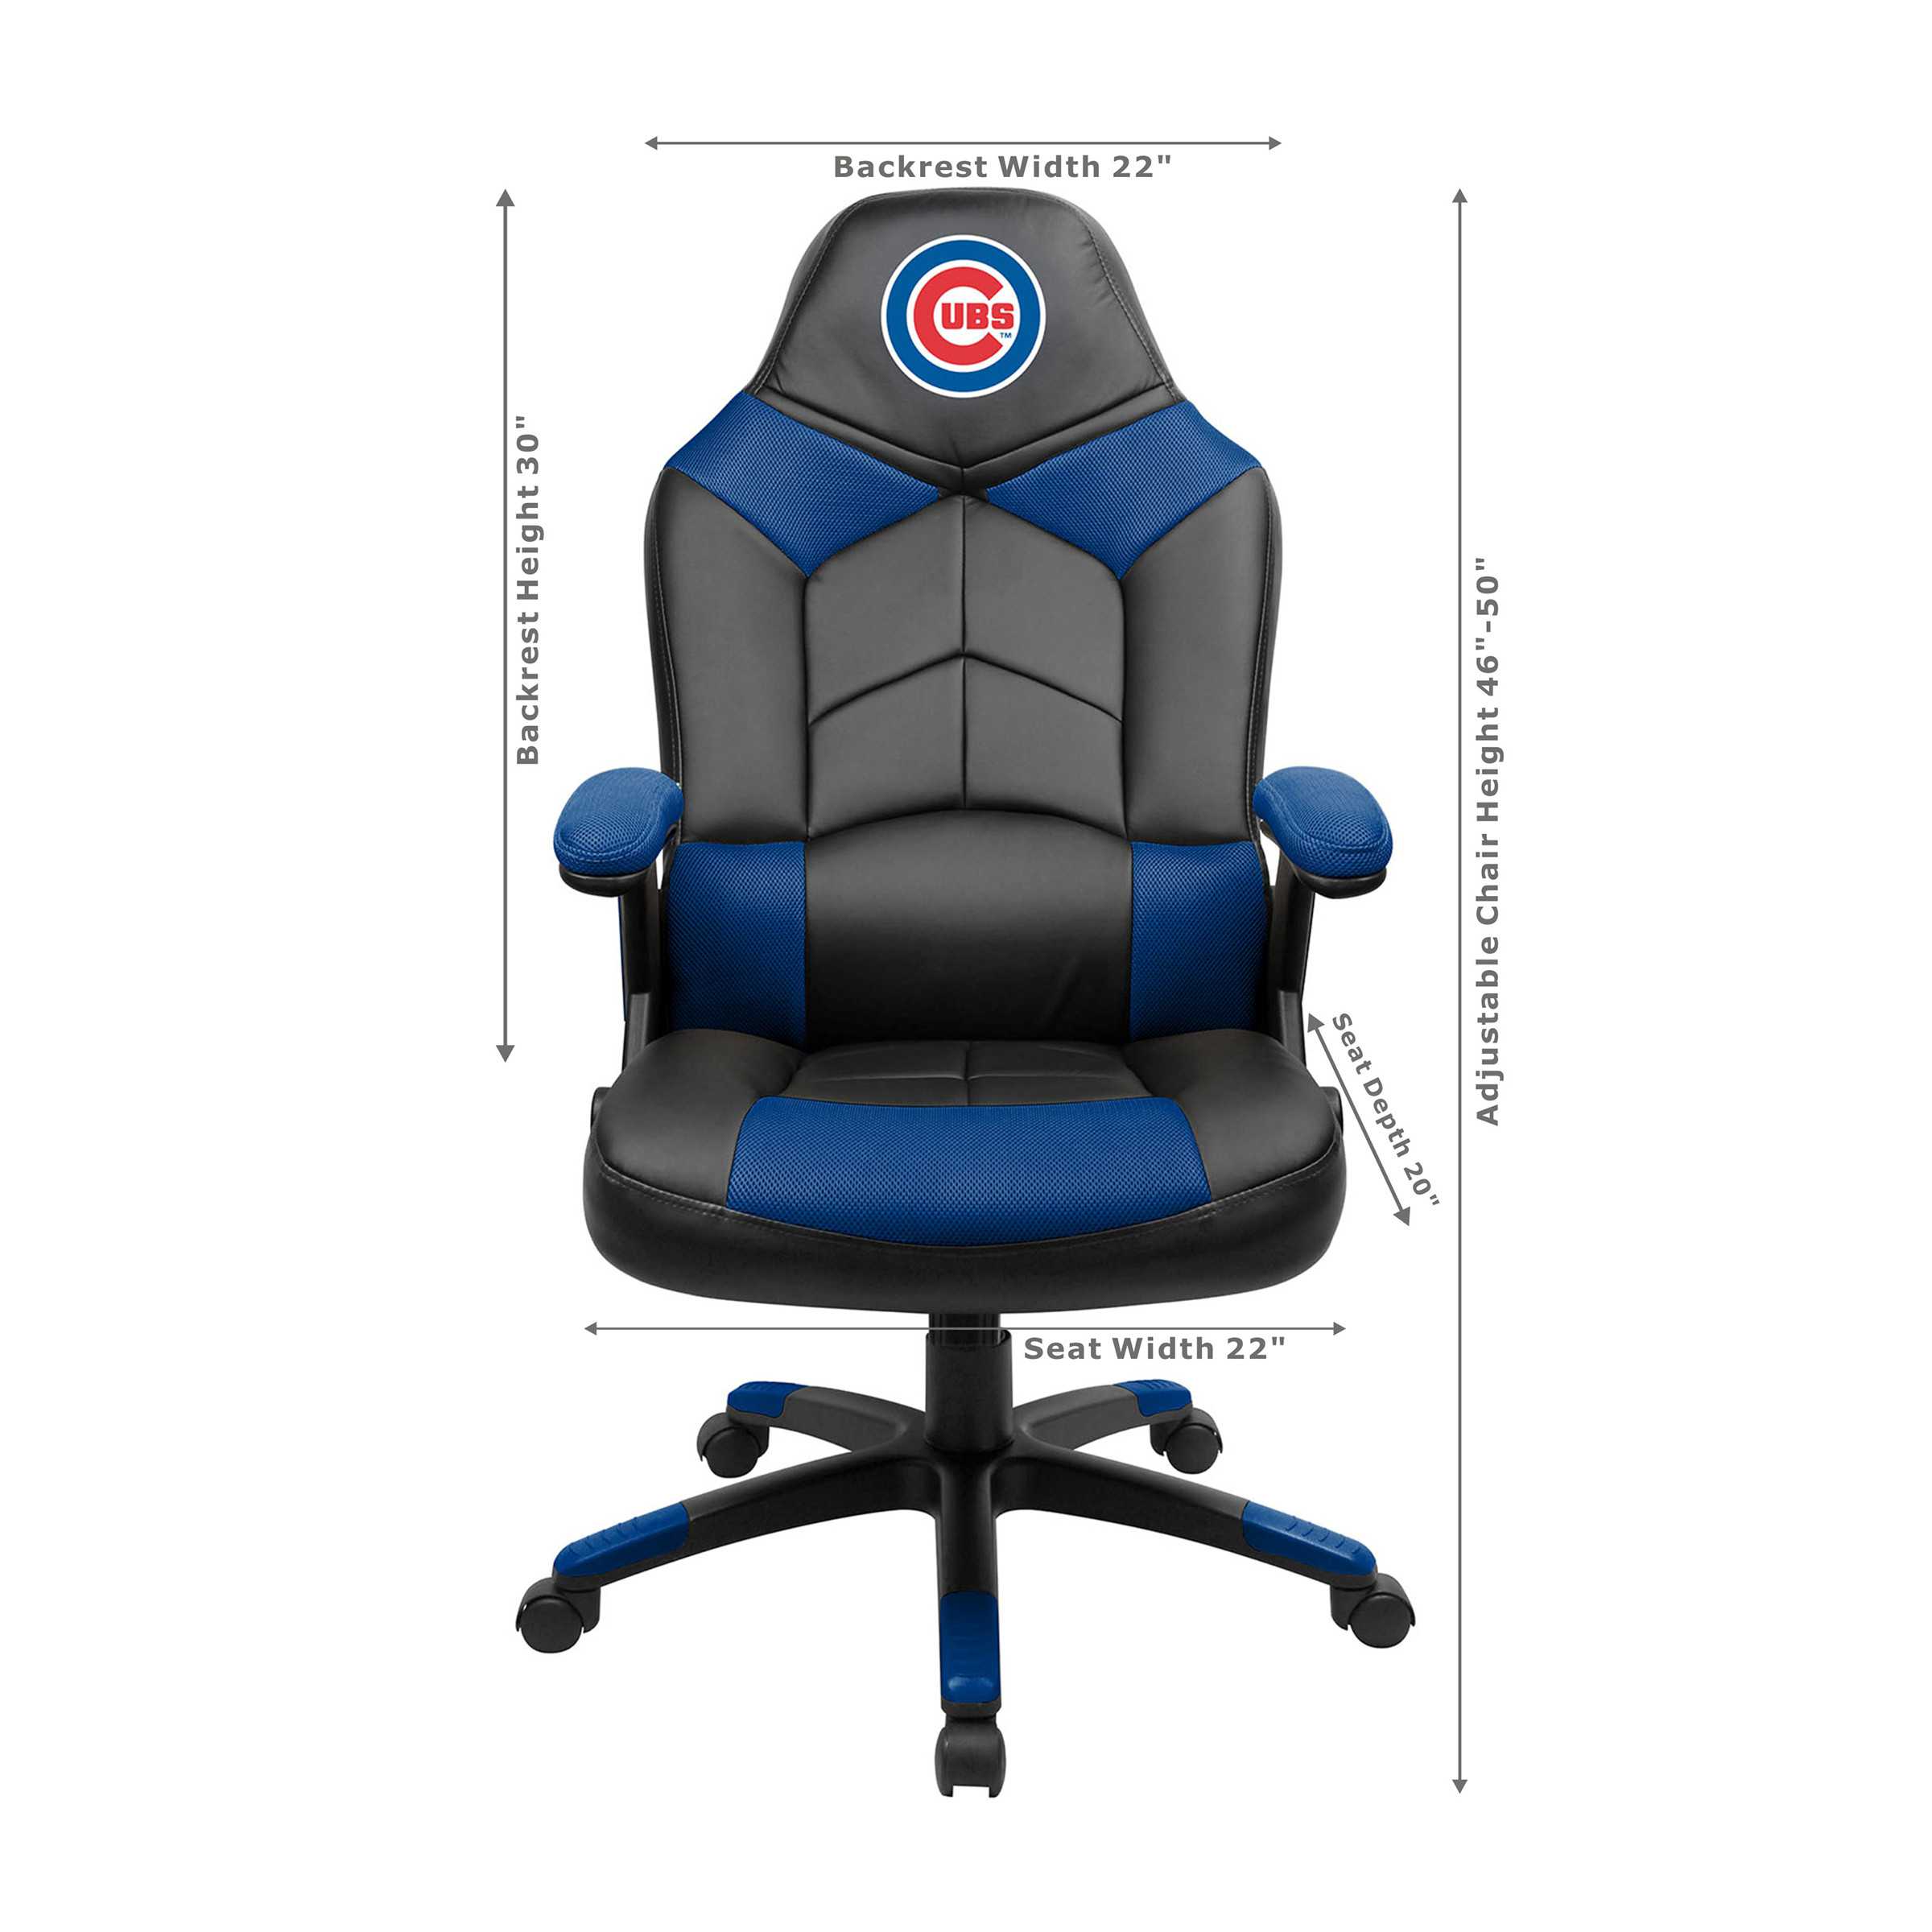 CHICAGO CUBS OVERSIZED GAMING CHAIR